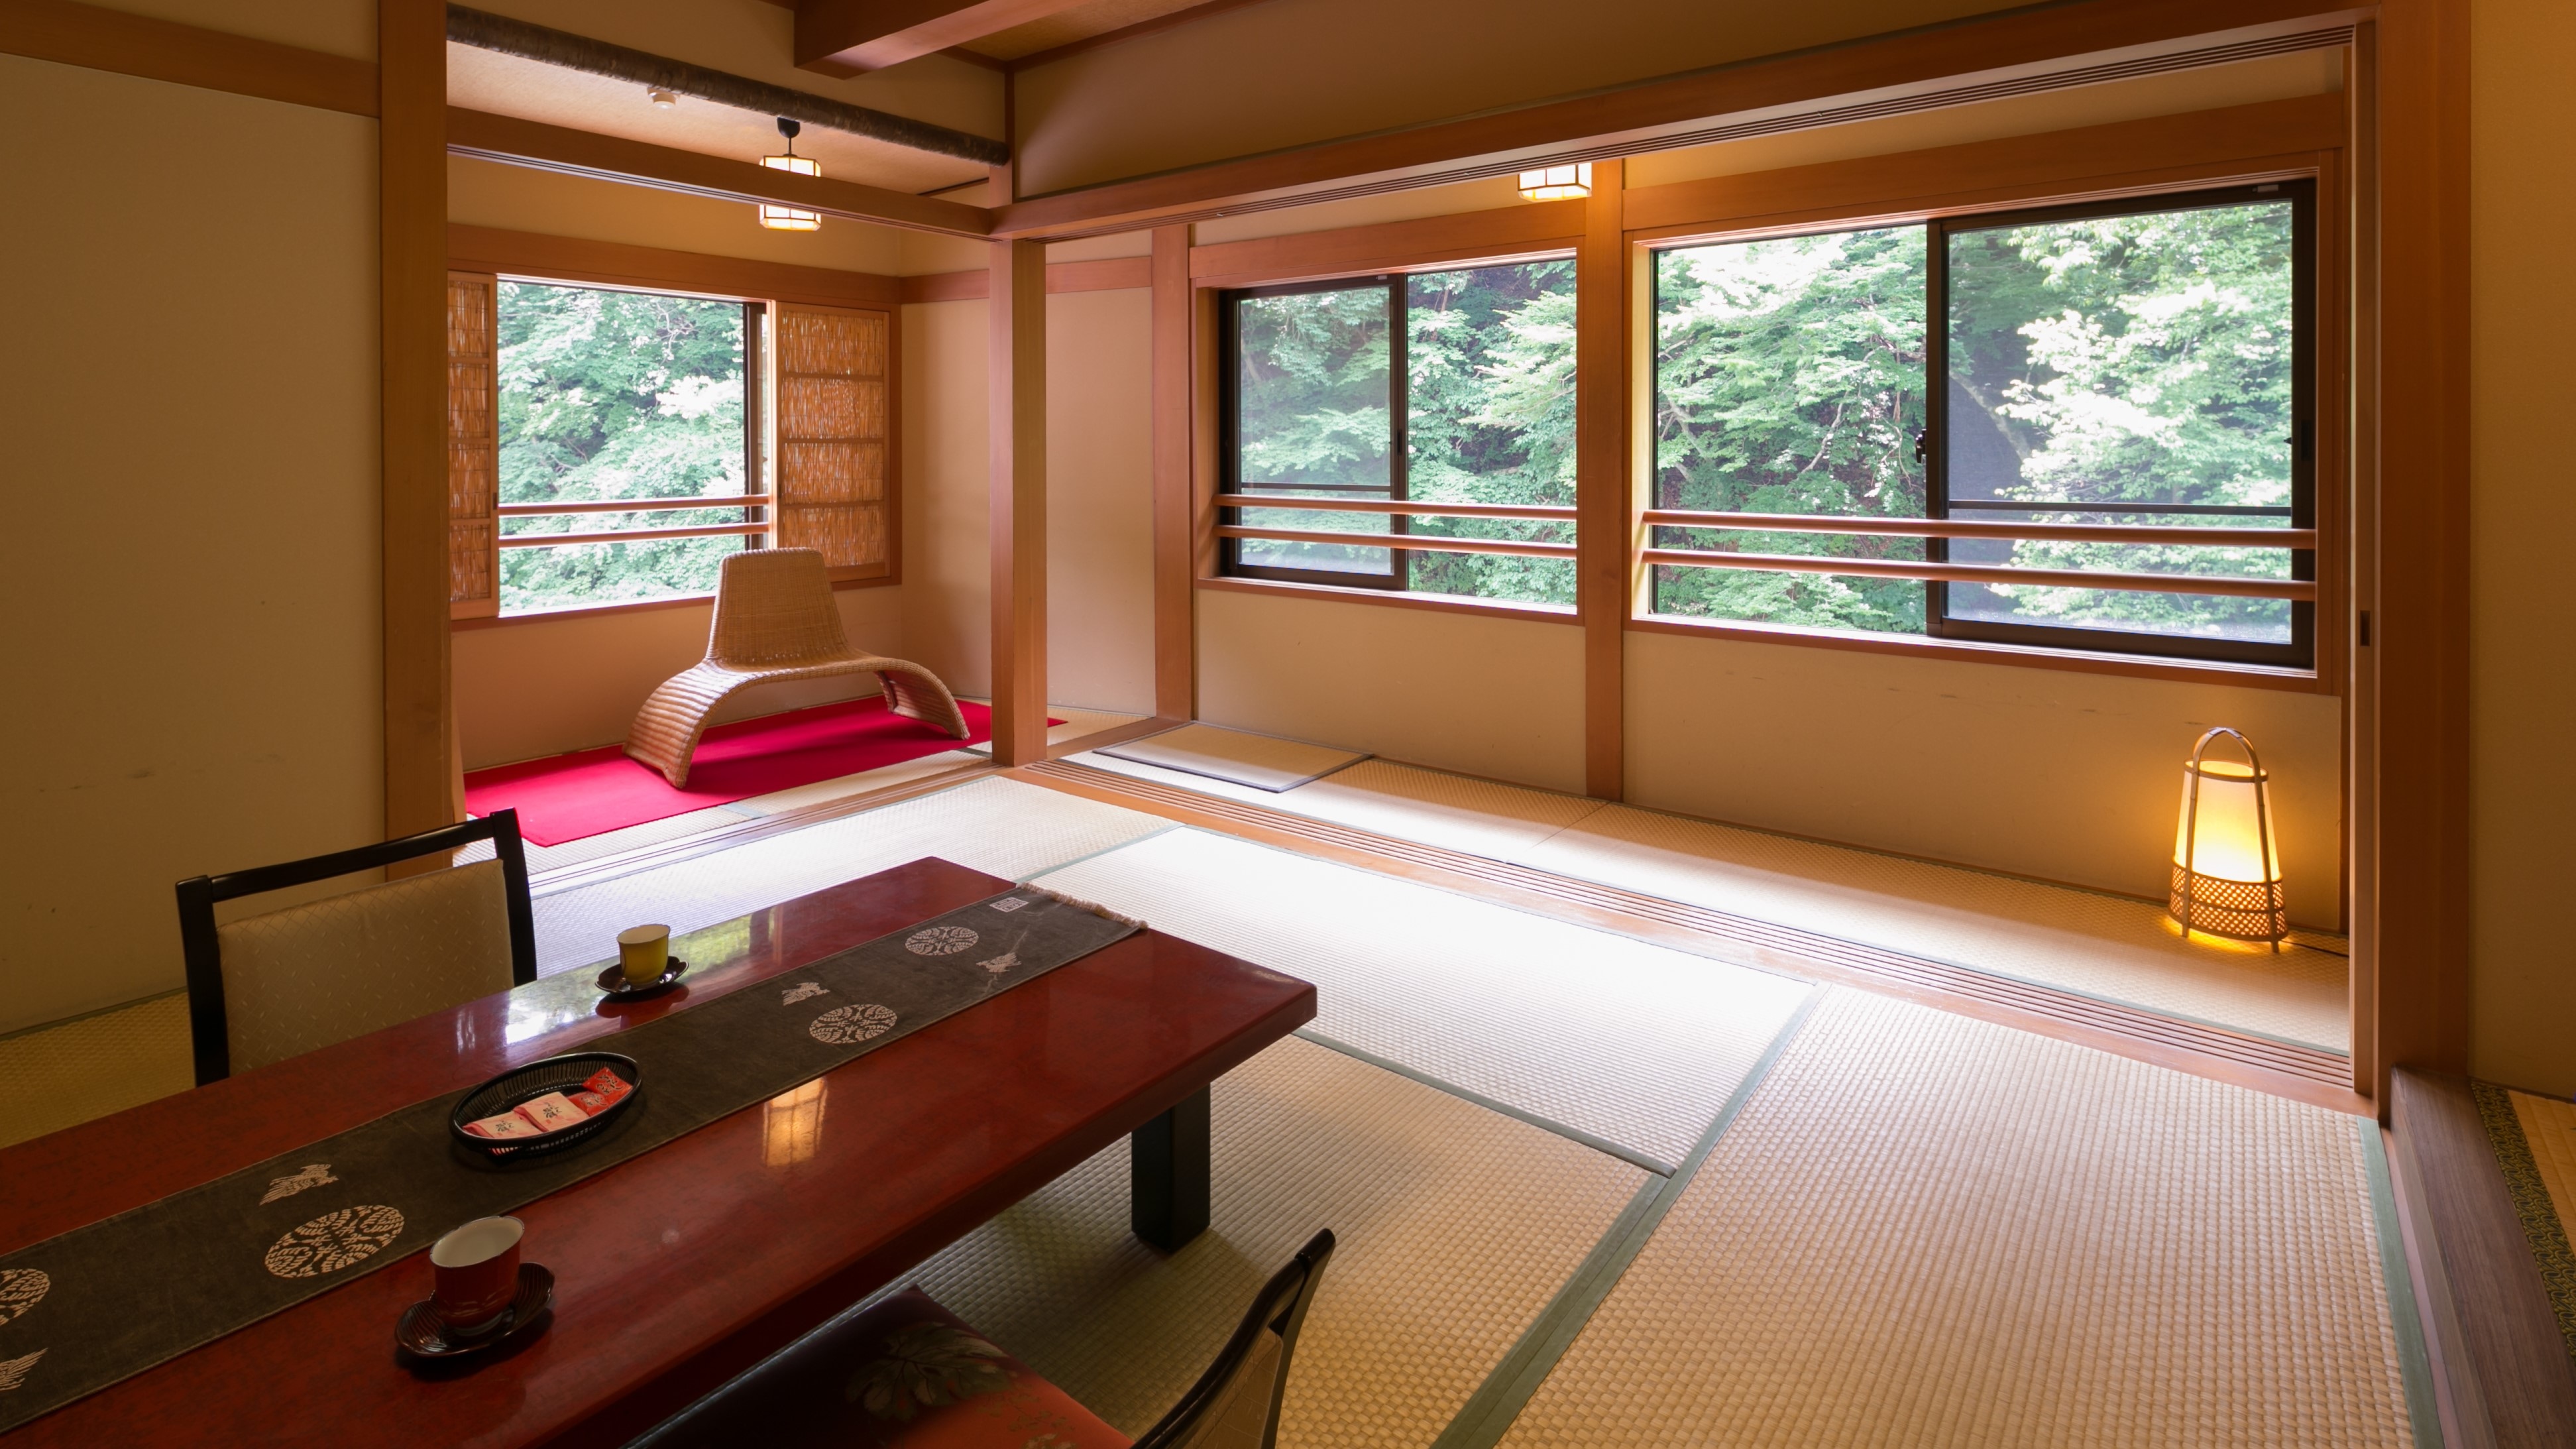 ・ Shakunage ・ Very popular with women! Pure Japanese style, corner room with 10 tatami mats overlooking the Shima River